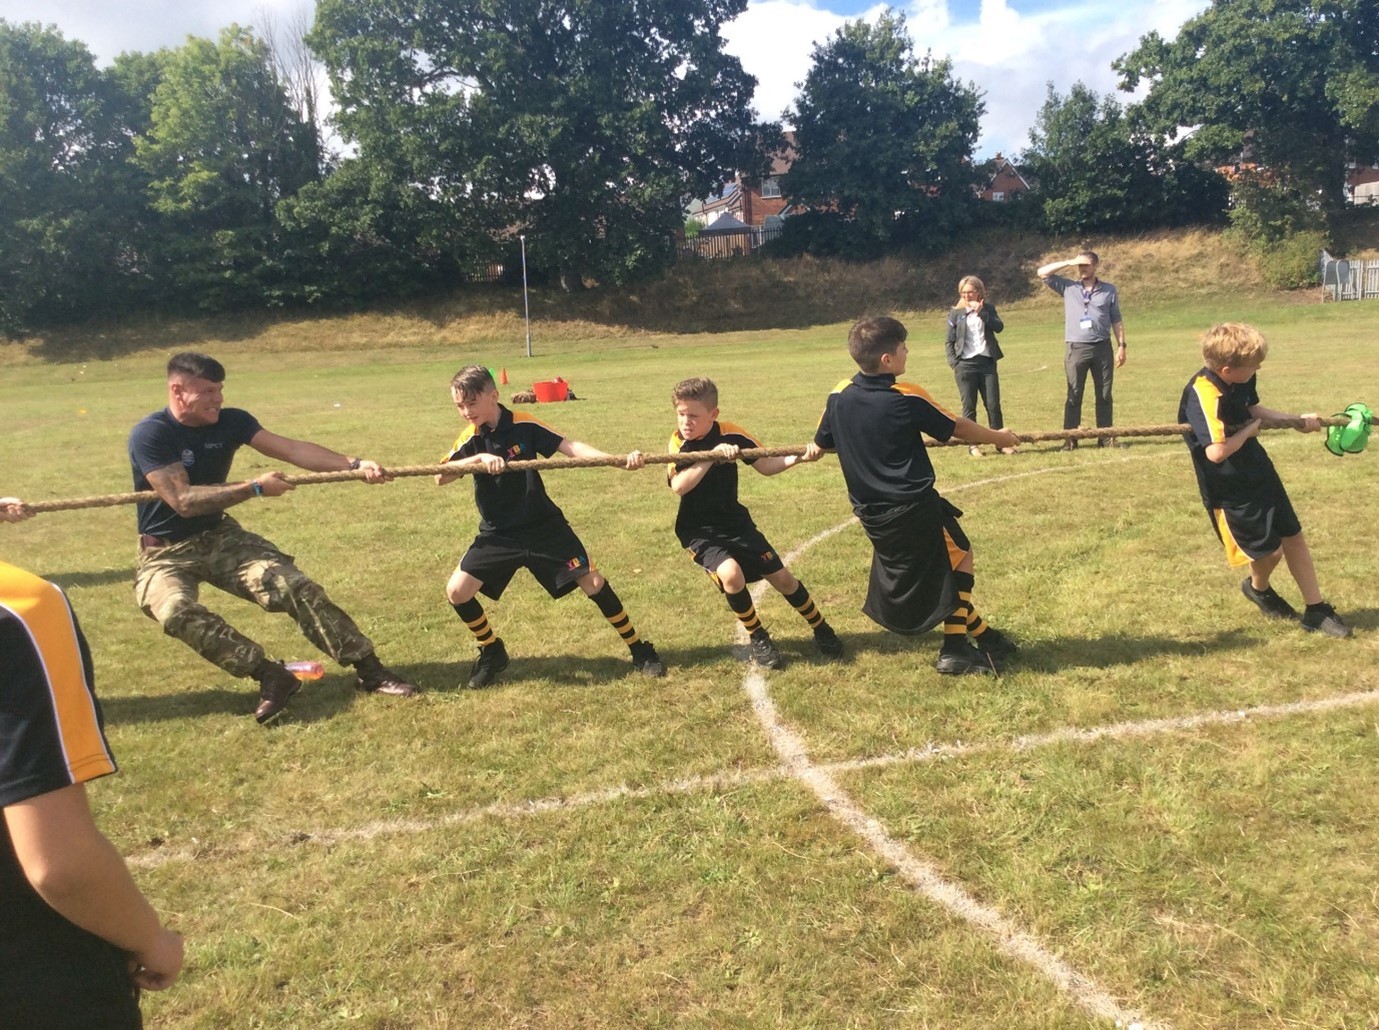 REACH day for Year 7s at Ysgol Bryn Alyn, working on developing teamwork, building resilience and problem-solving skills.